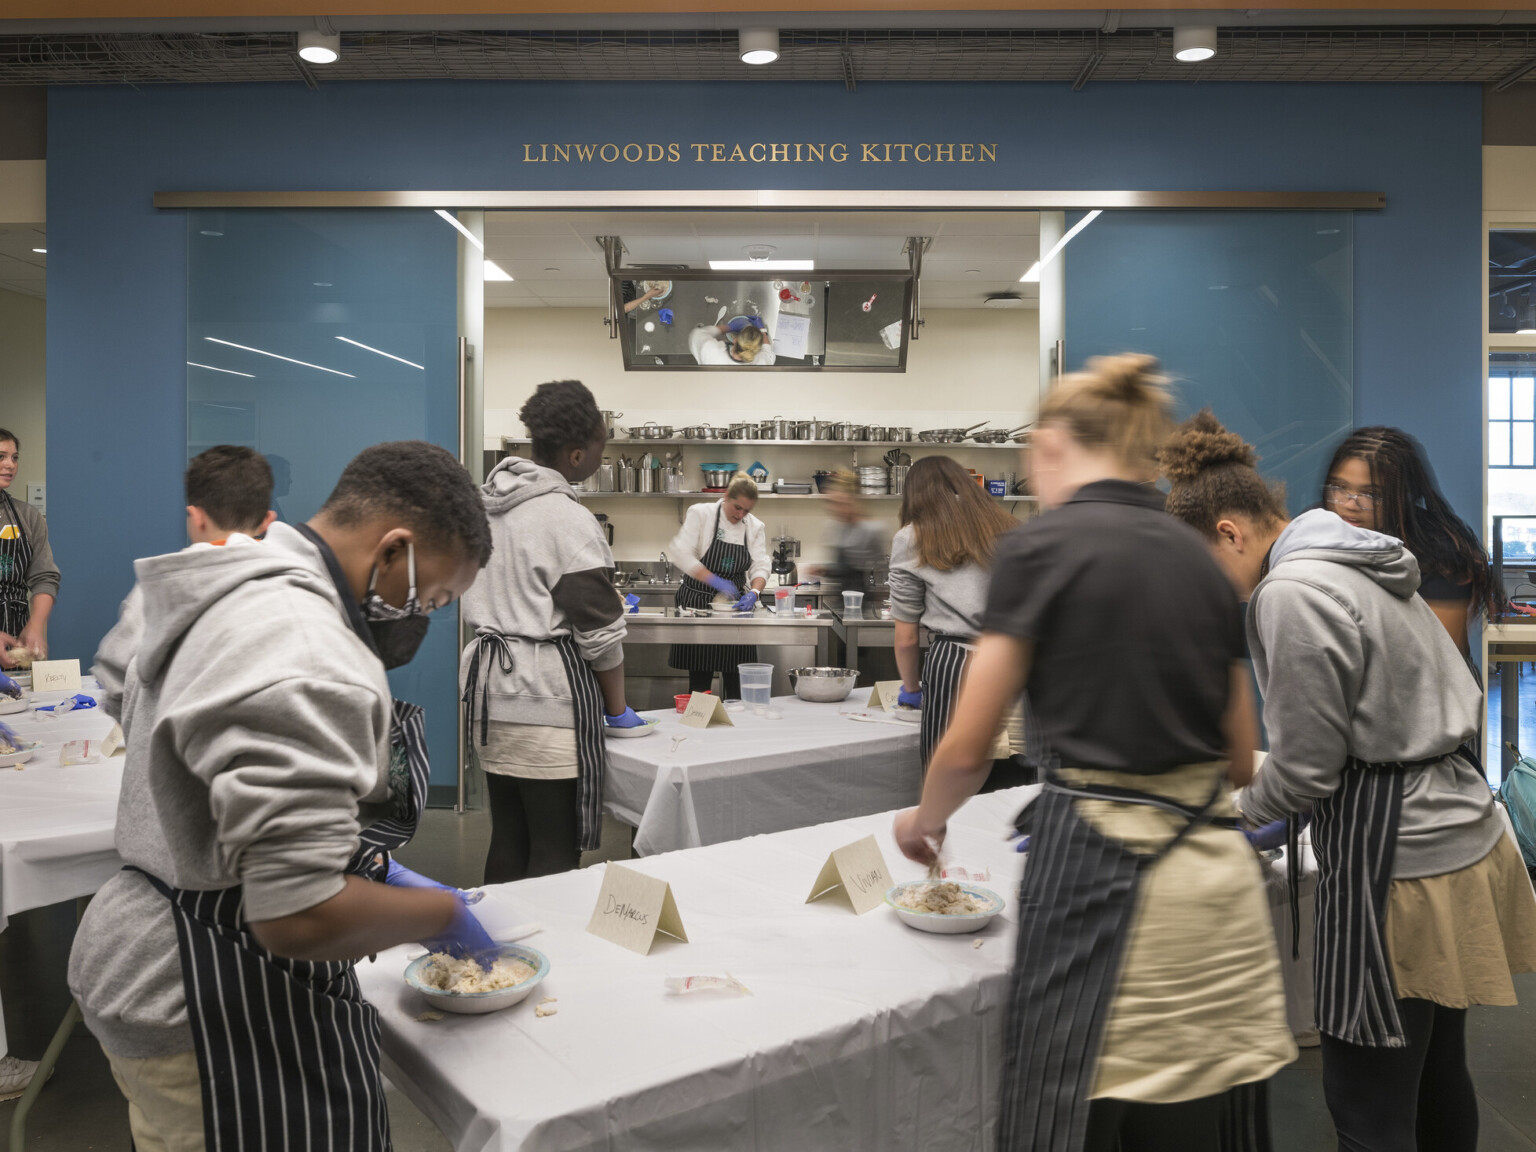 students mixing ingredients of a recipe on group work tables in the teaching kitchen, deep teal walls with overhead lighting, windows provide natural light